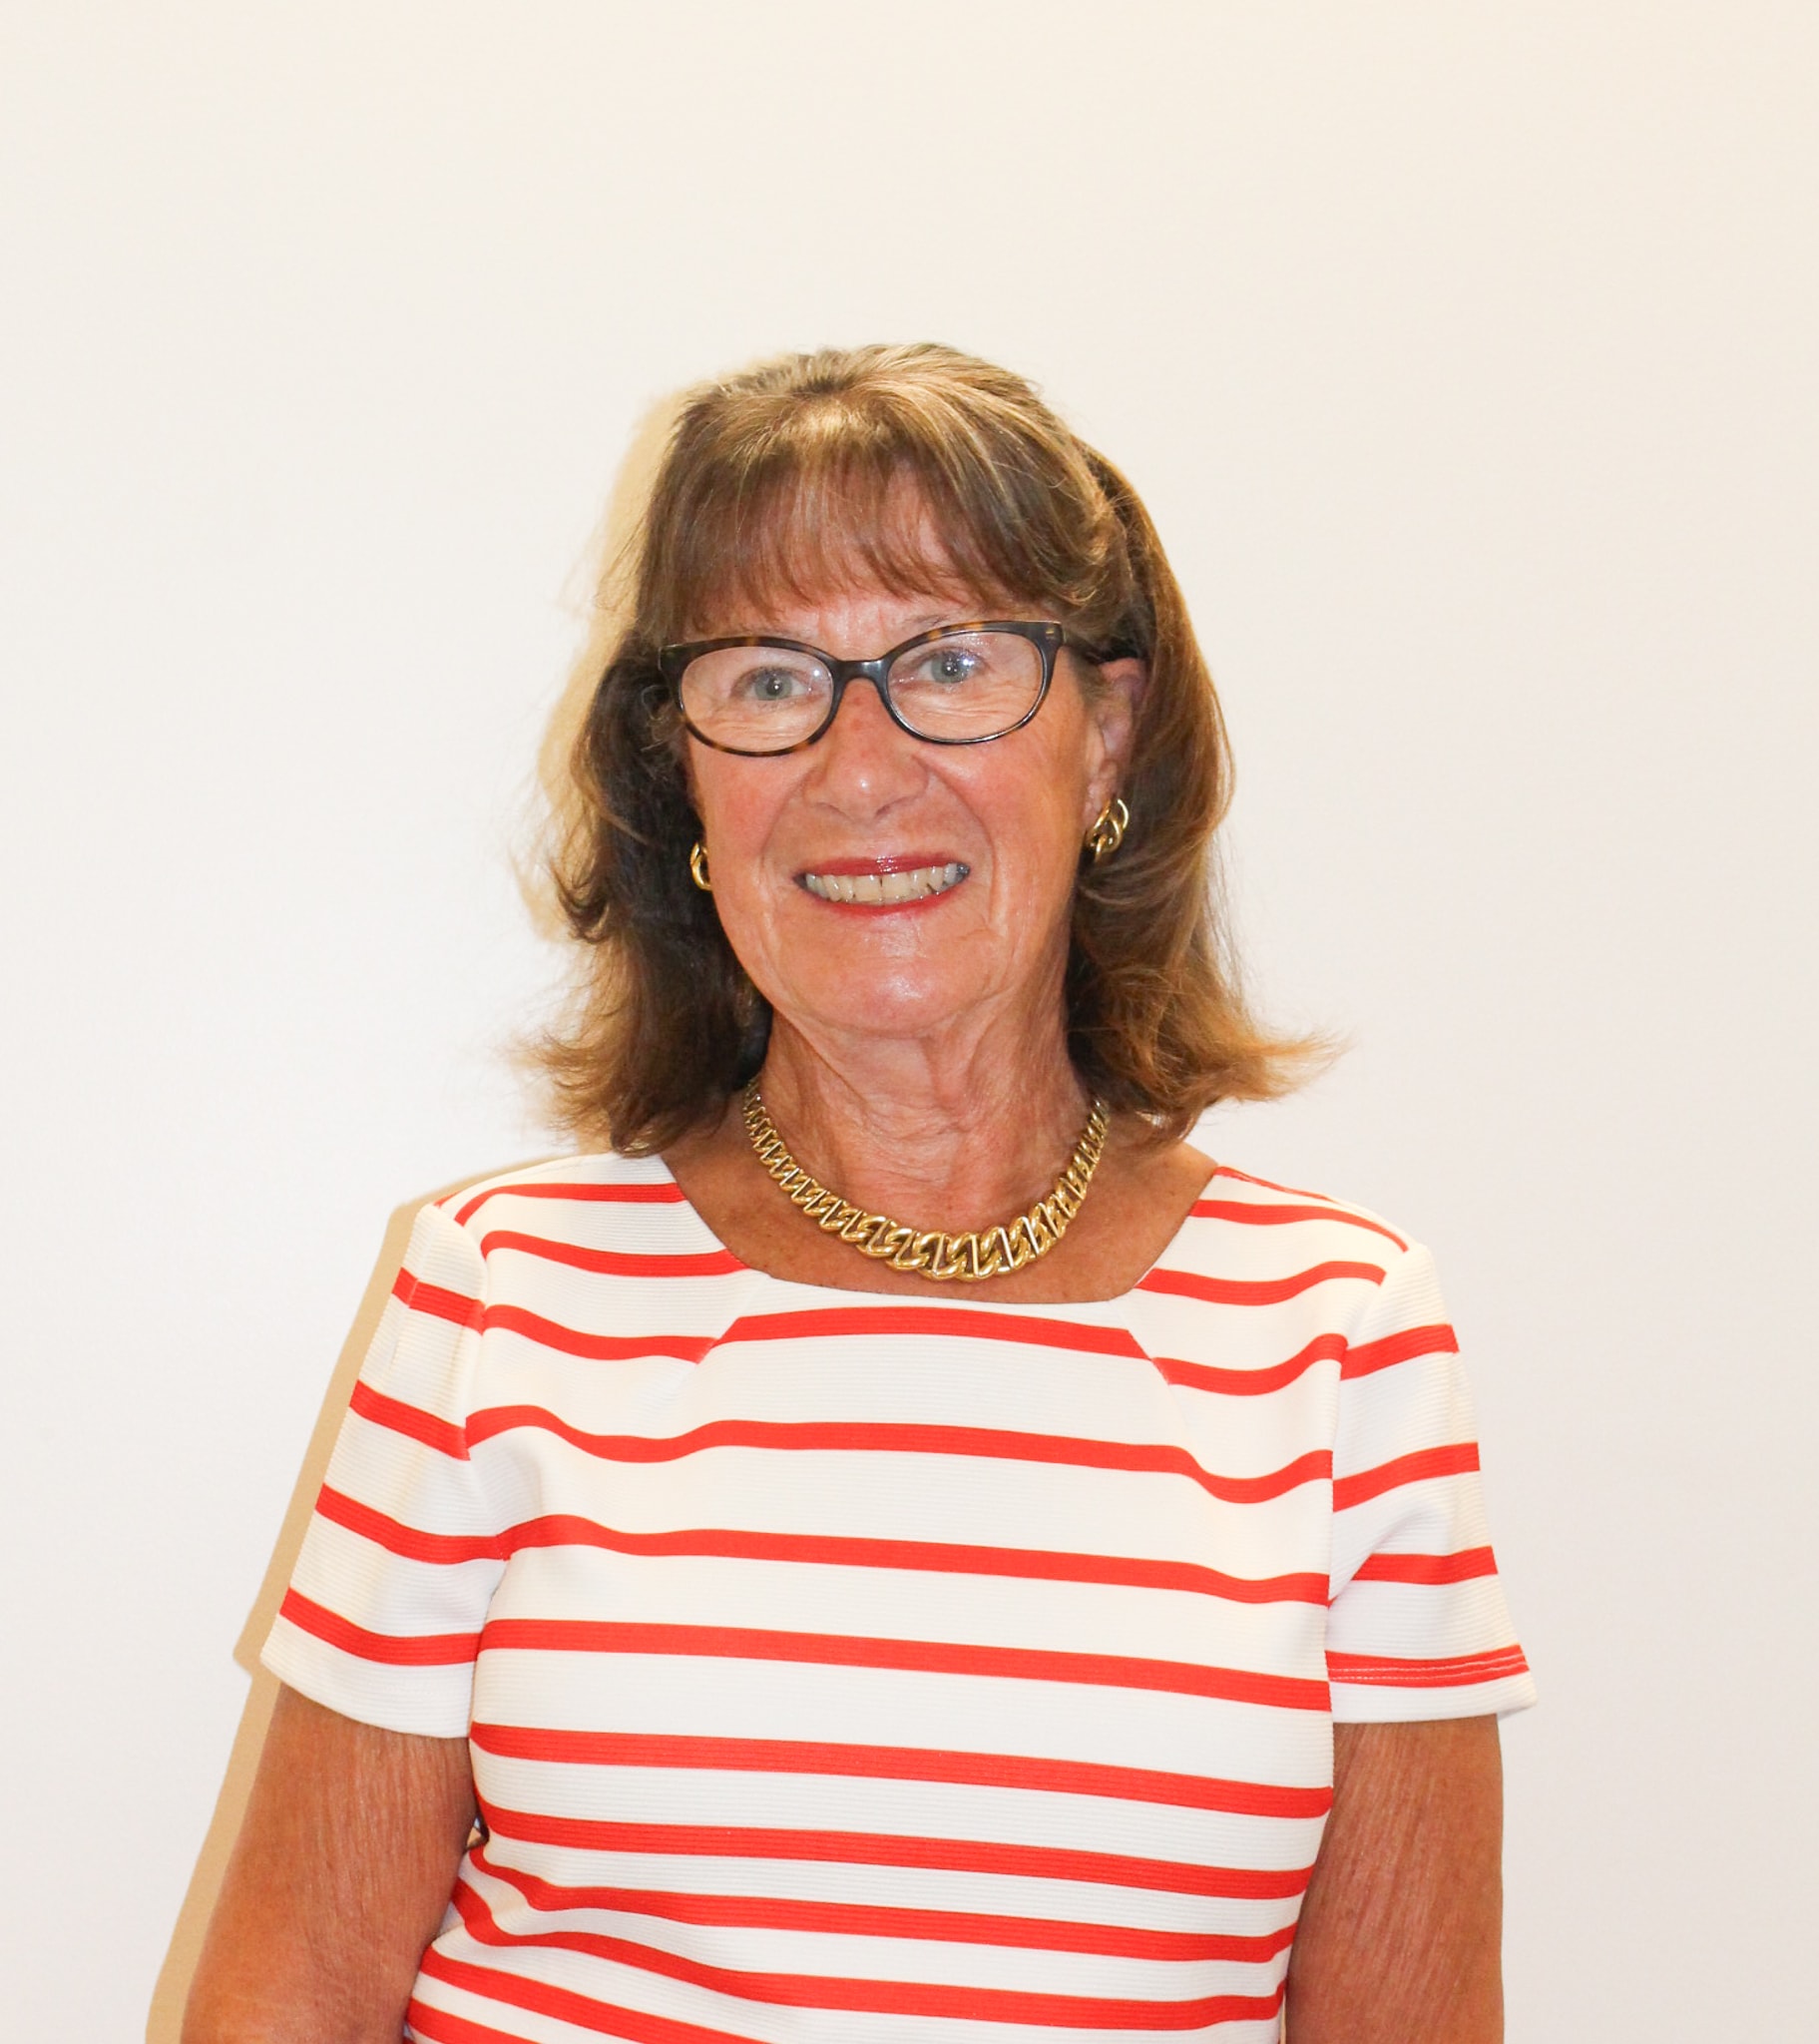 GYAC Welcomes Susan Cotter as a New Board Member